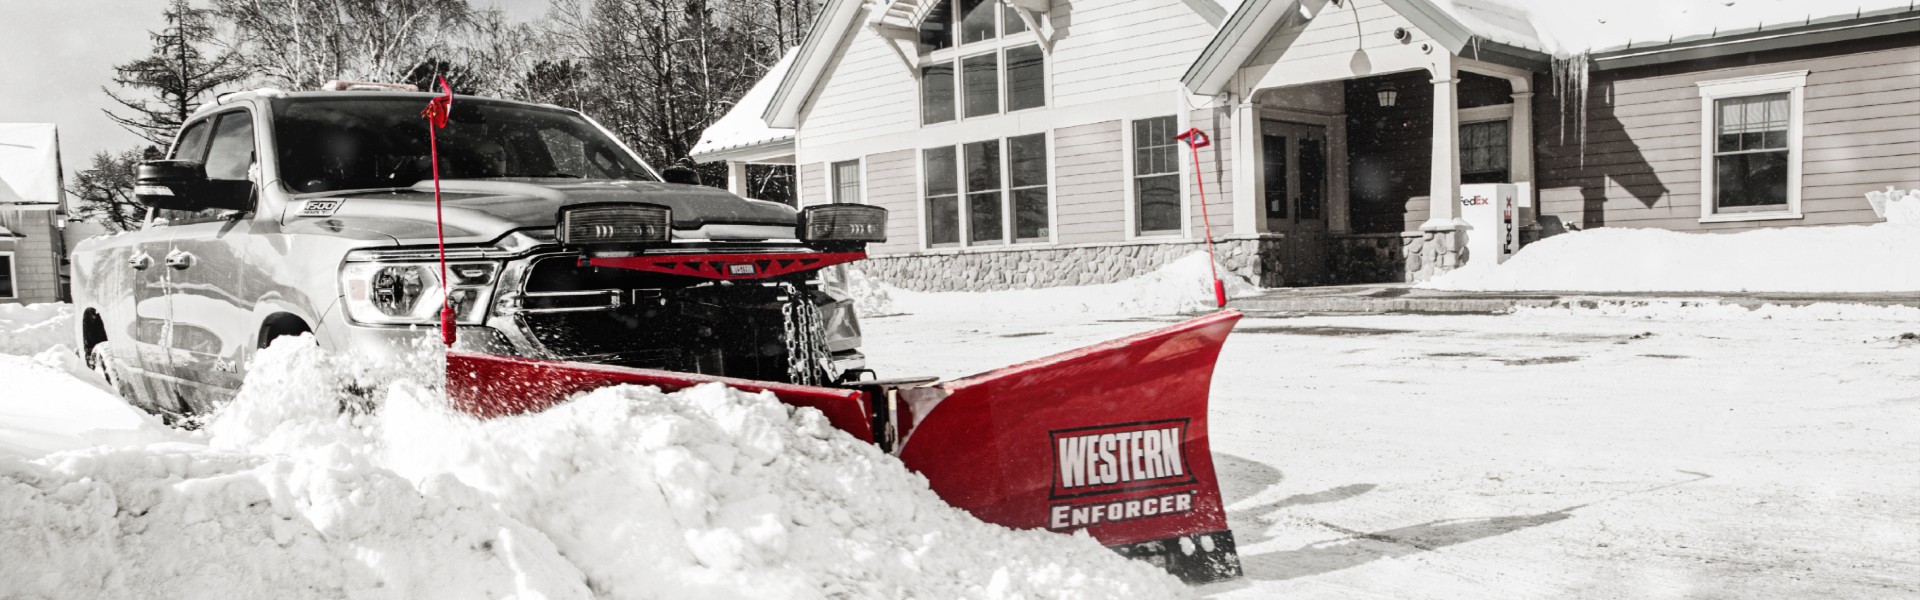 A truck pushing snow with a Western plow